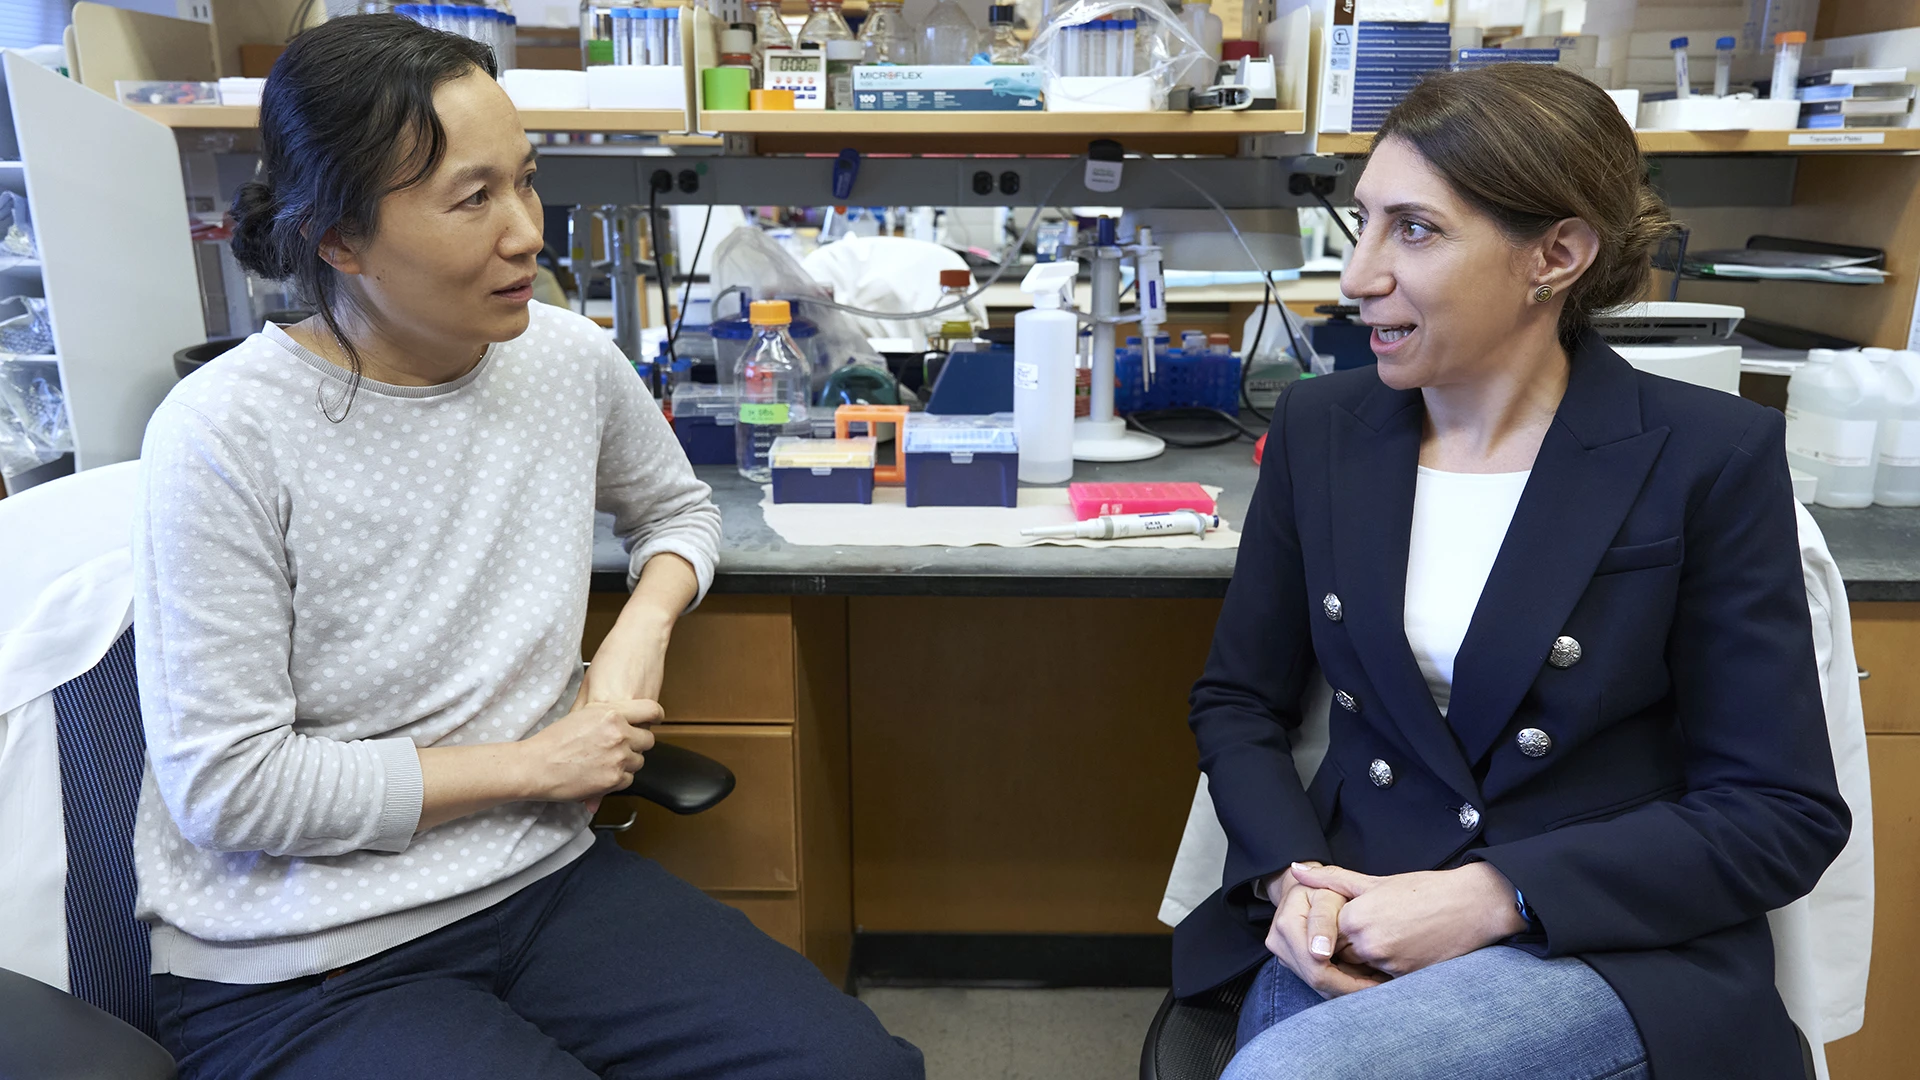 Dr. Zou (left) and Dr. Hambardzumyan (right) have discovered that microglia congregate preferentially in a ring at the margins of glioblastoma. They are delving into how this ring performs signaling, which they could in turn exploit to block proliferation and block invasion.